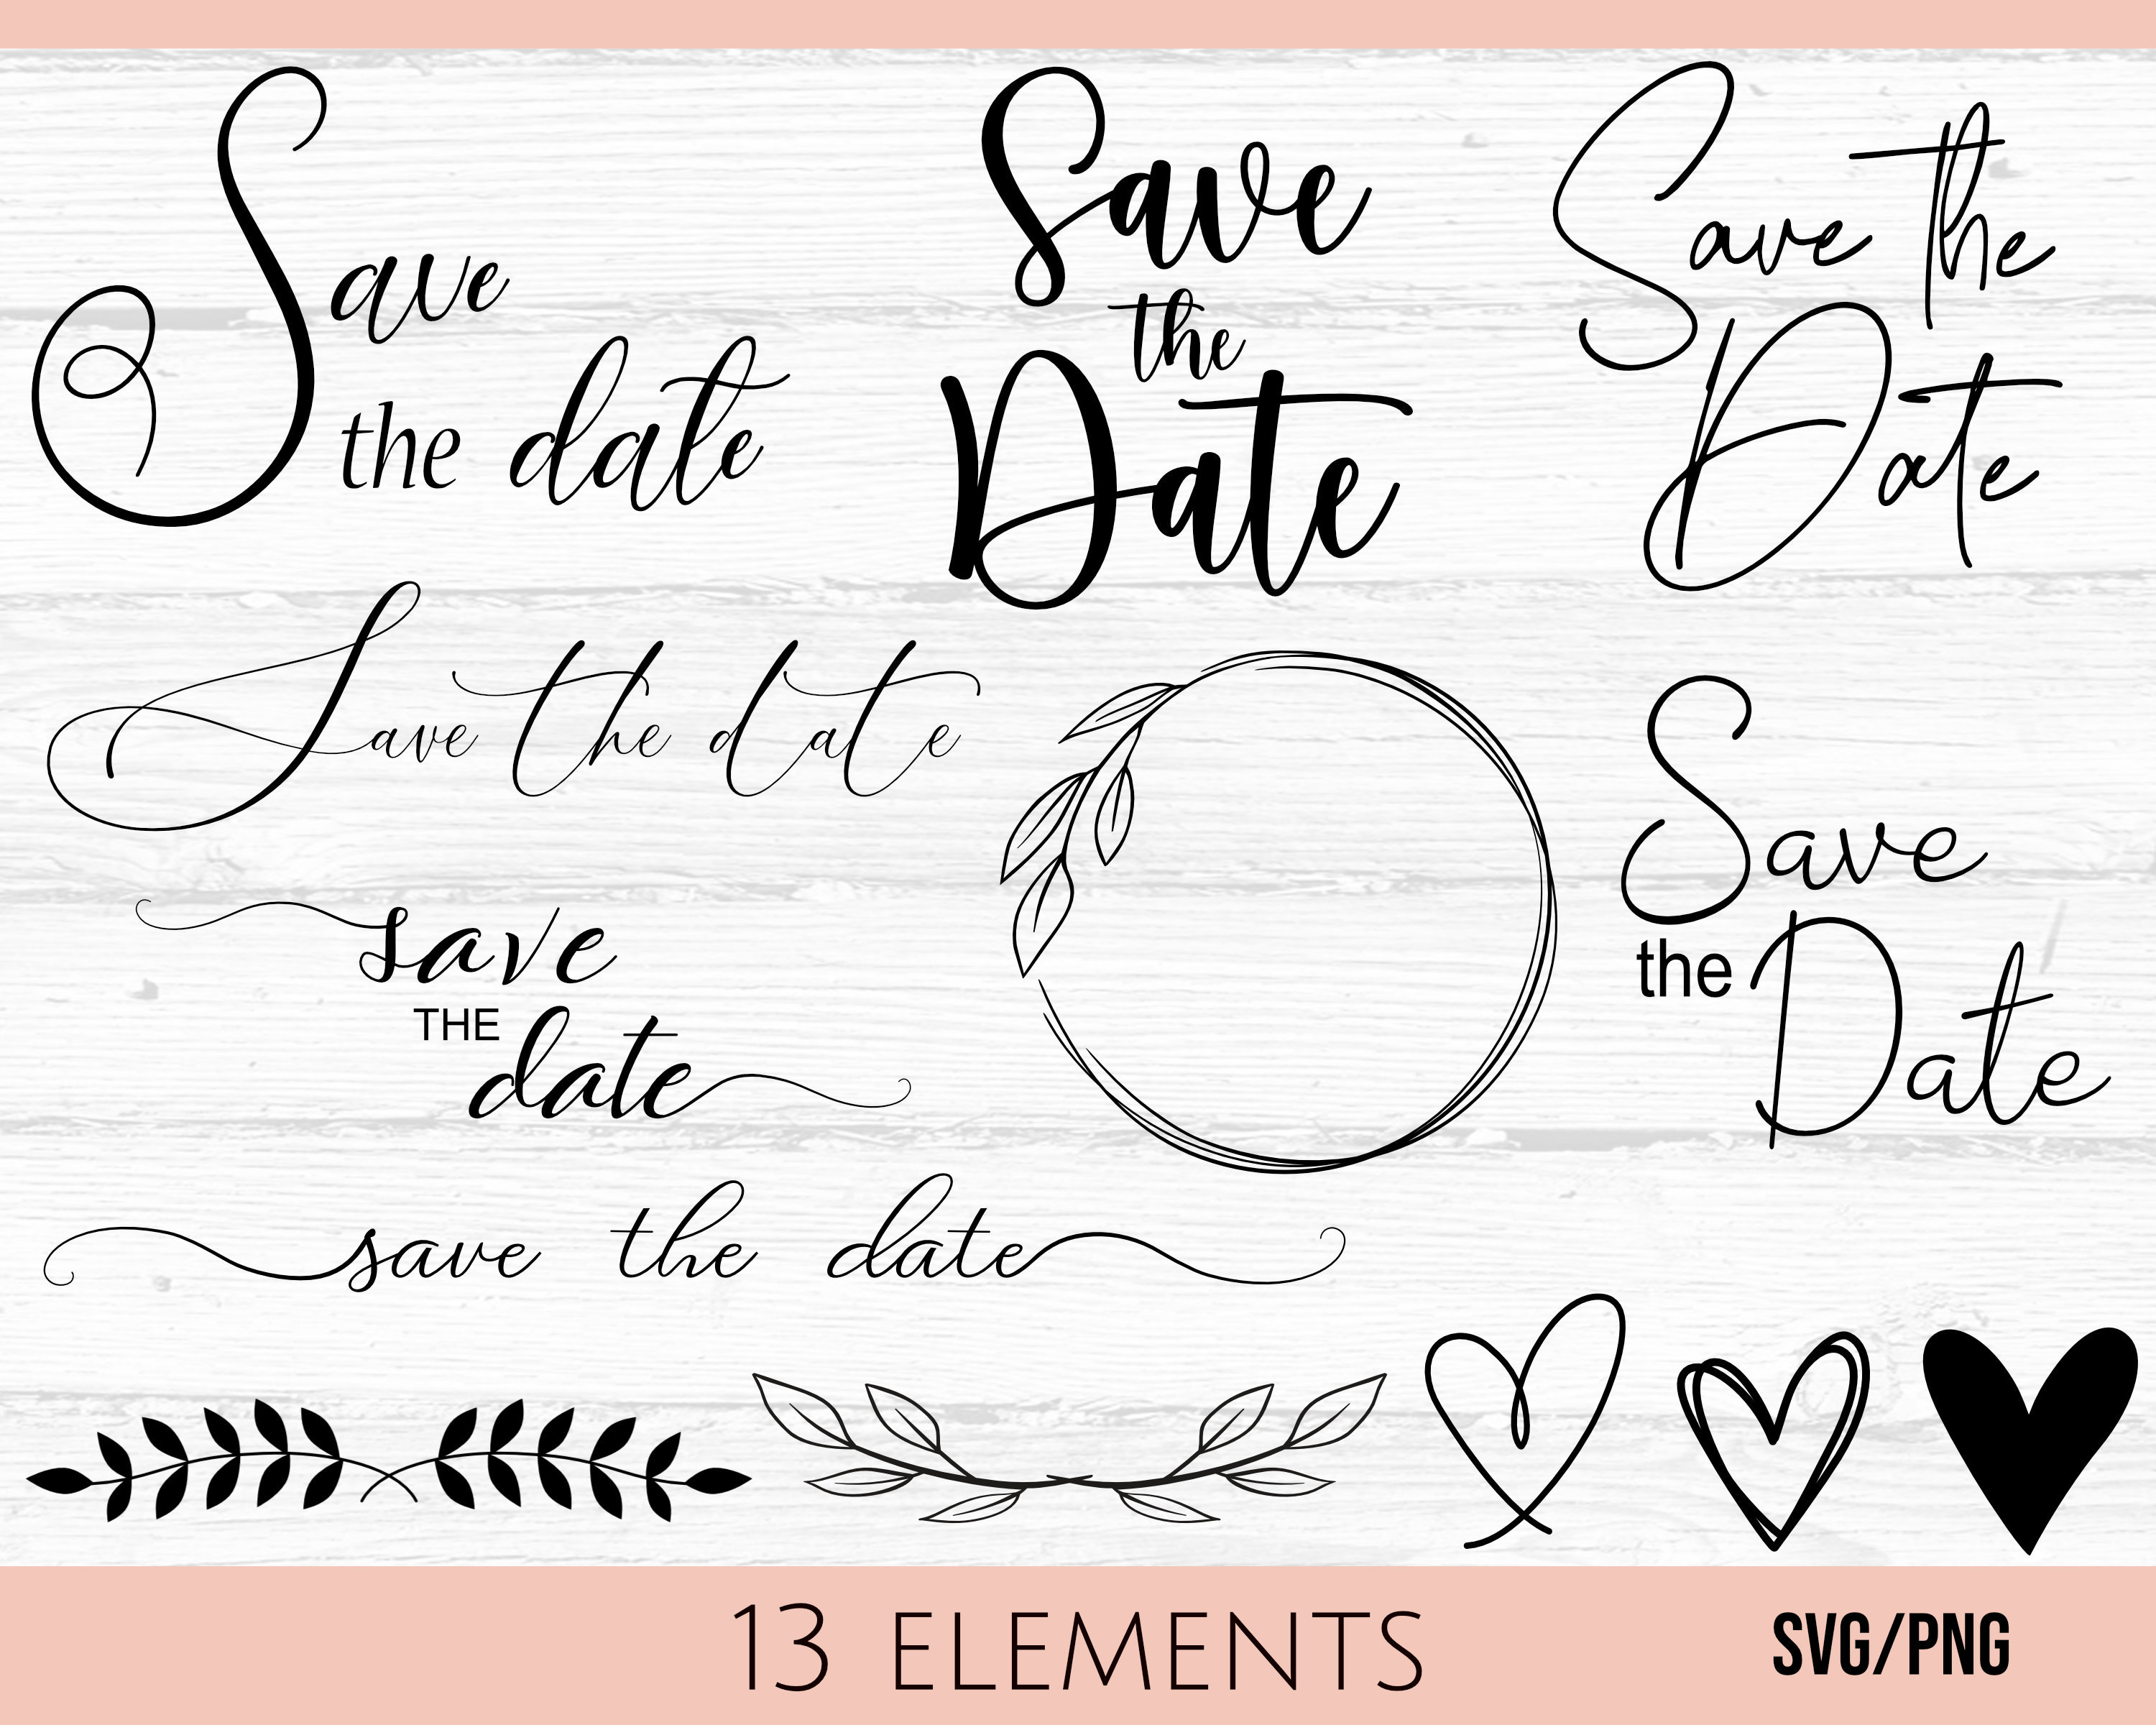 80-Pack, 2” Kraft Save The Date Stickers, Rustic Save The Date Labels,  Envelope Seals 